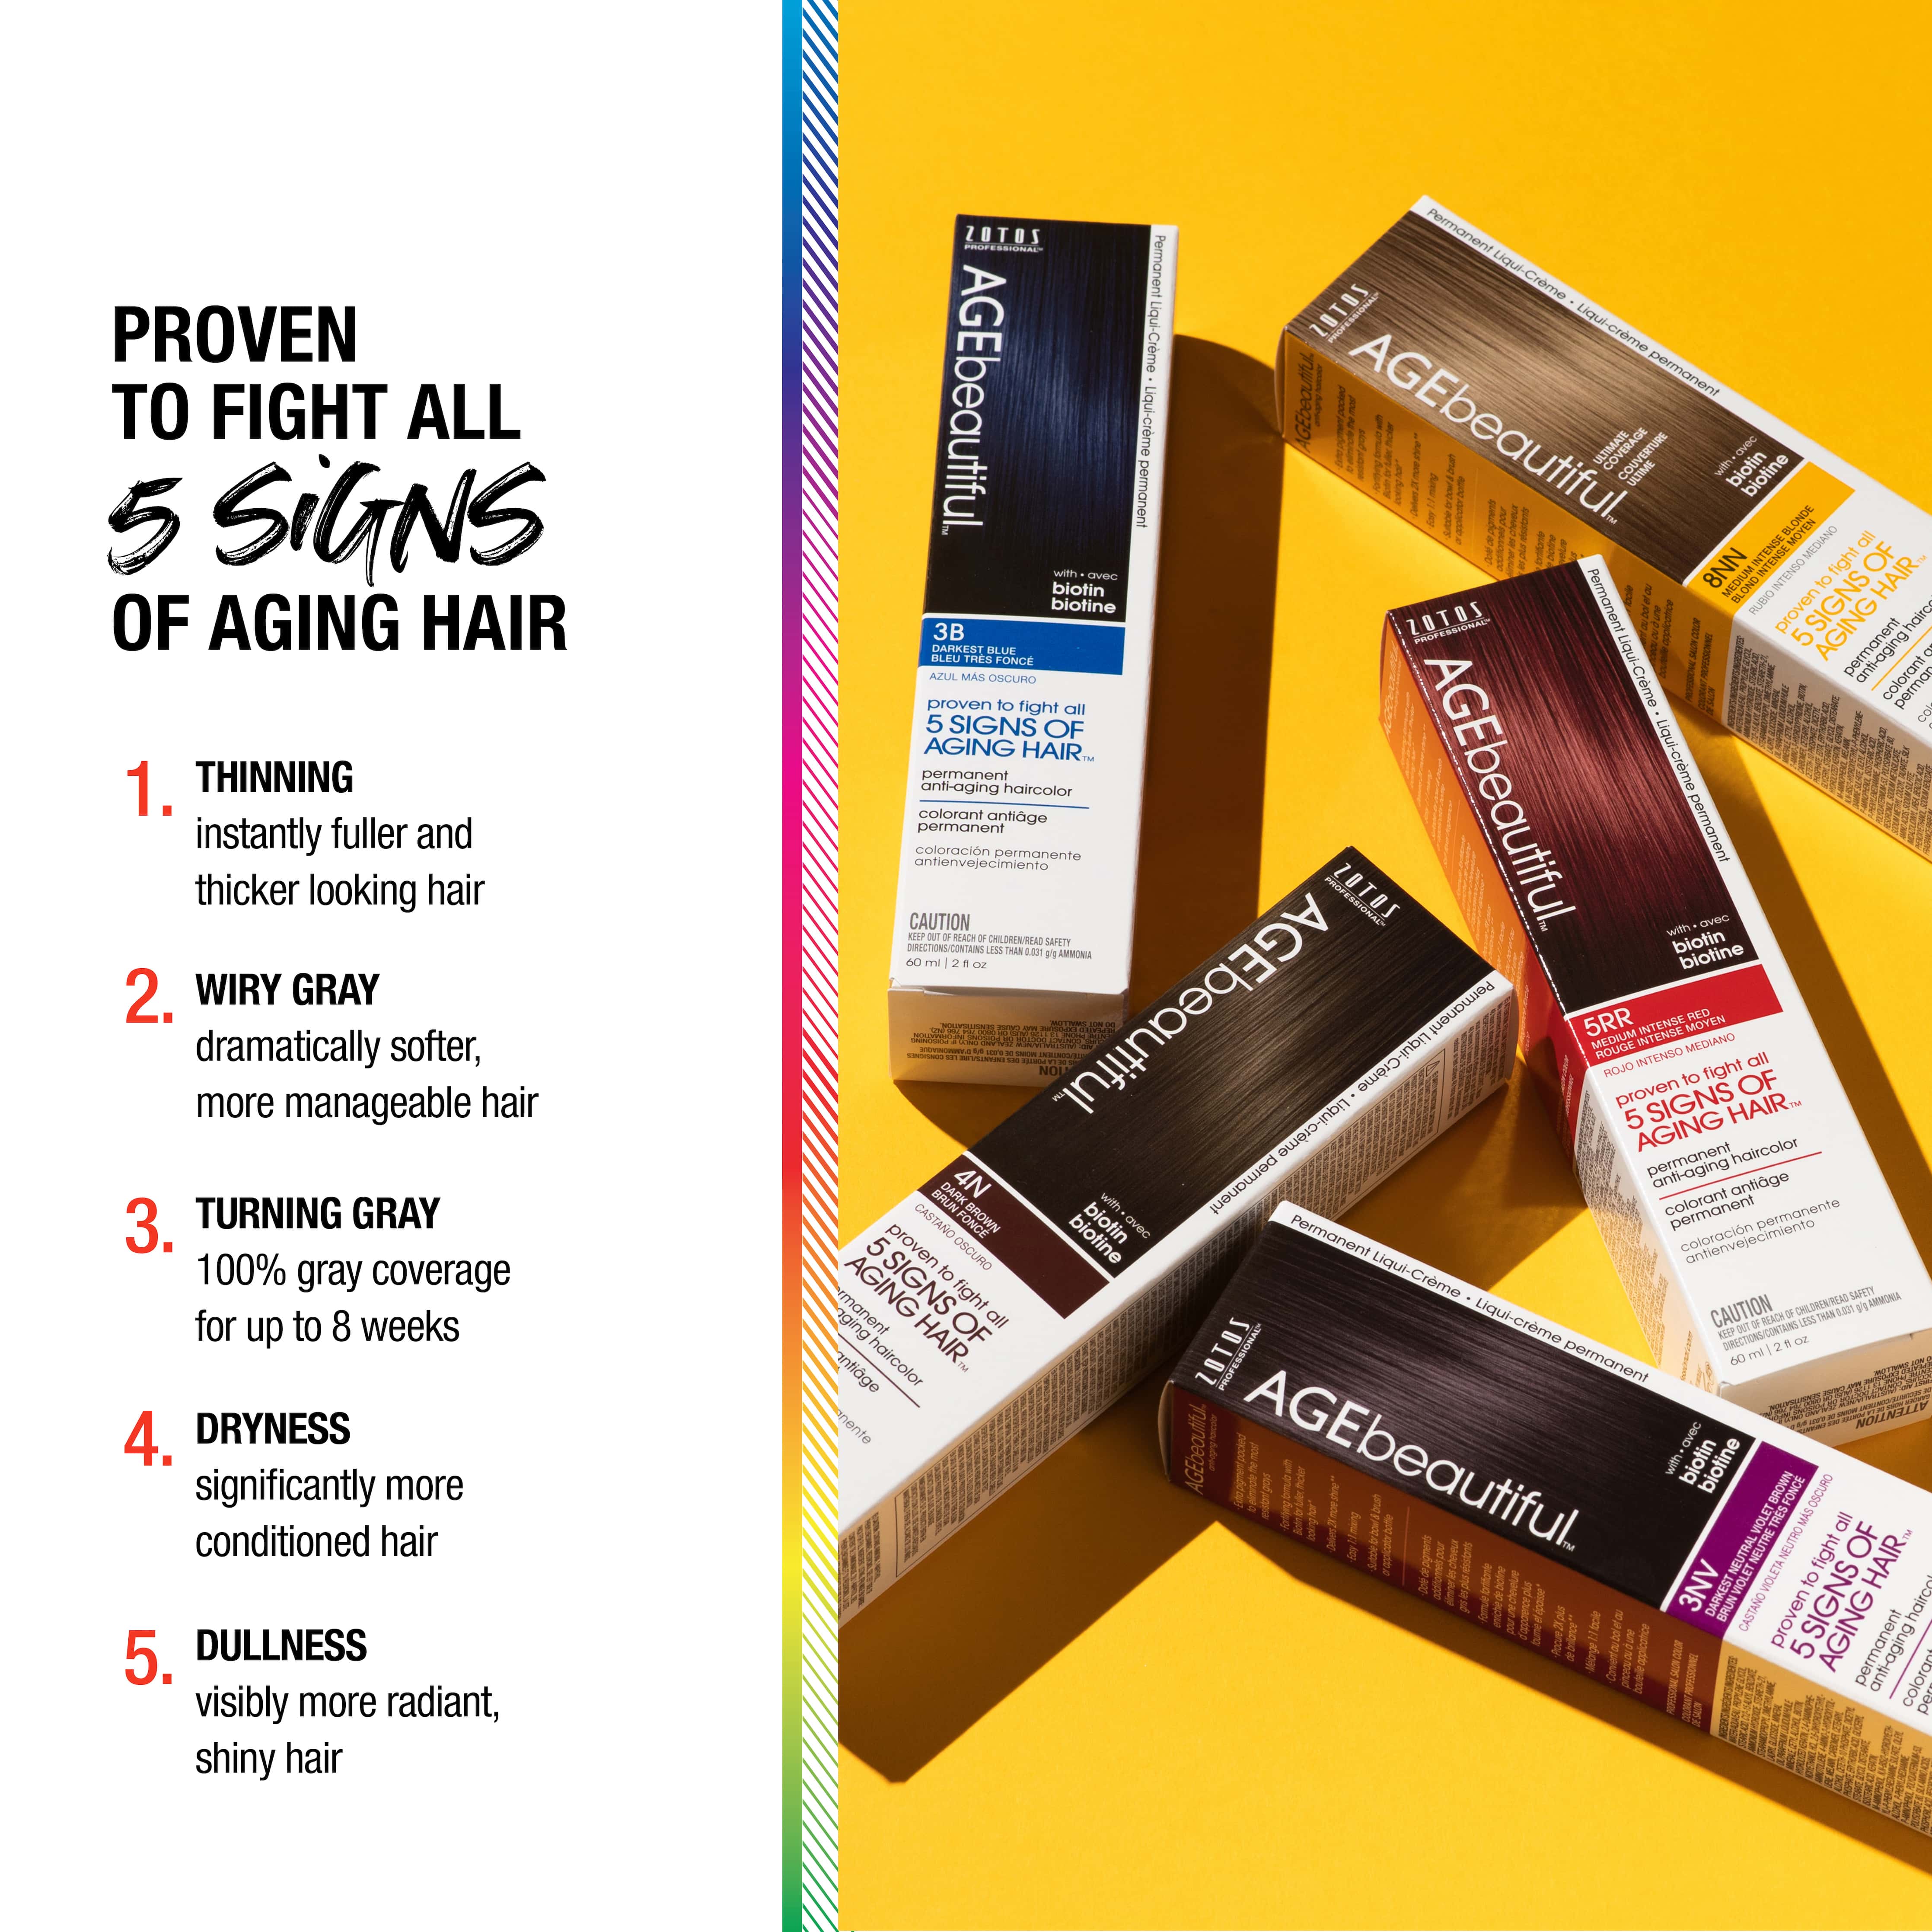 Agebeautiful products for aging hair